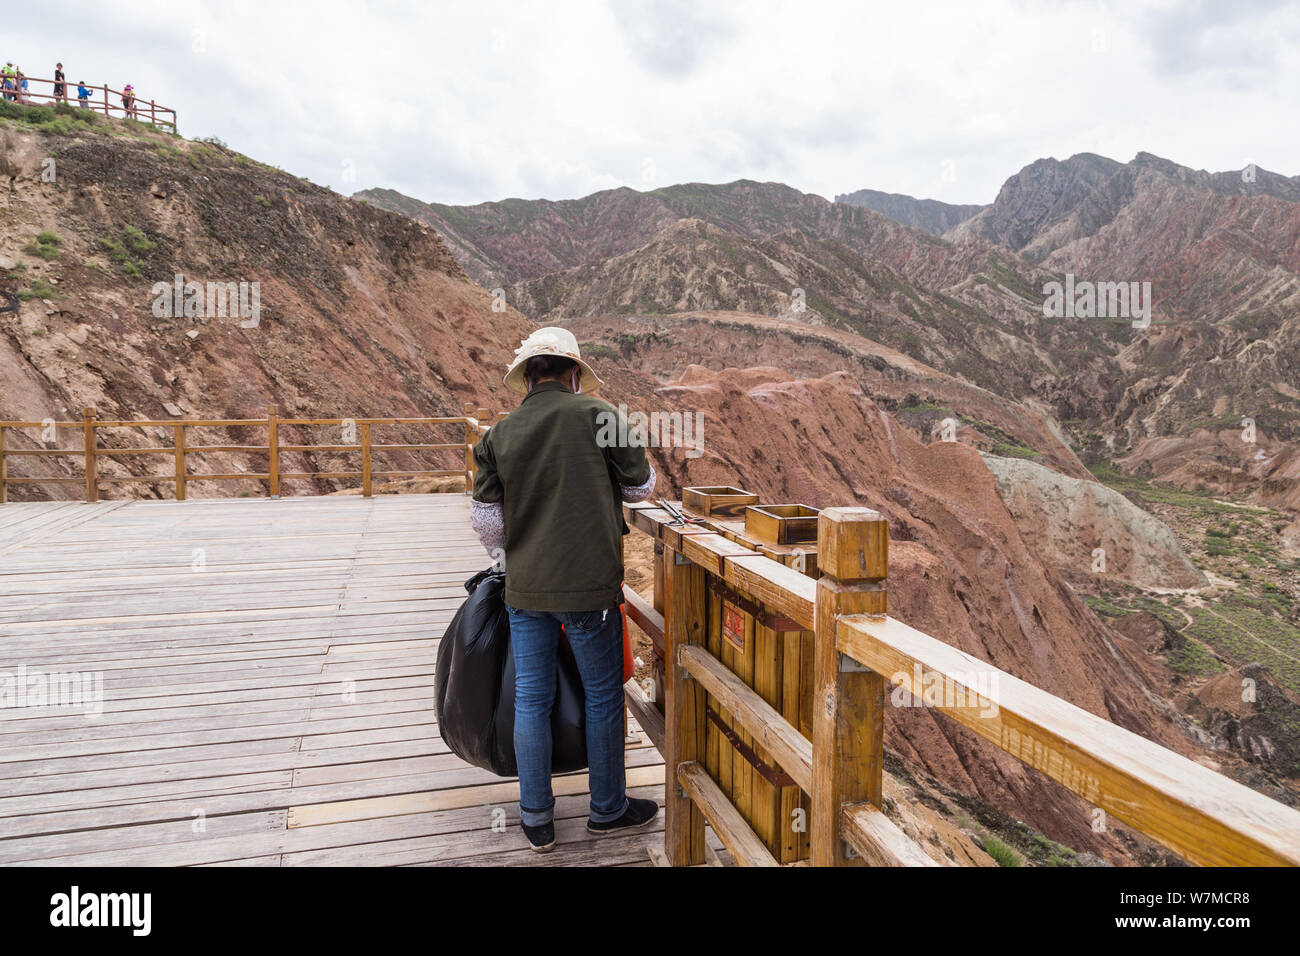 49-year-old Chinese cleaner surnamed Hu cleans up garbage on a mountain at the Zhangye Danxia Landform Geological Park in Zhangye city, northwest Chin Stock Photo